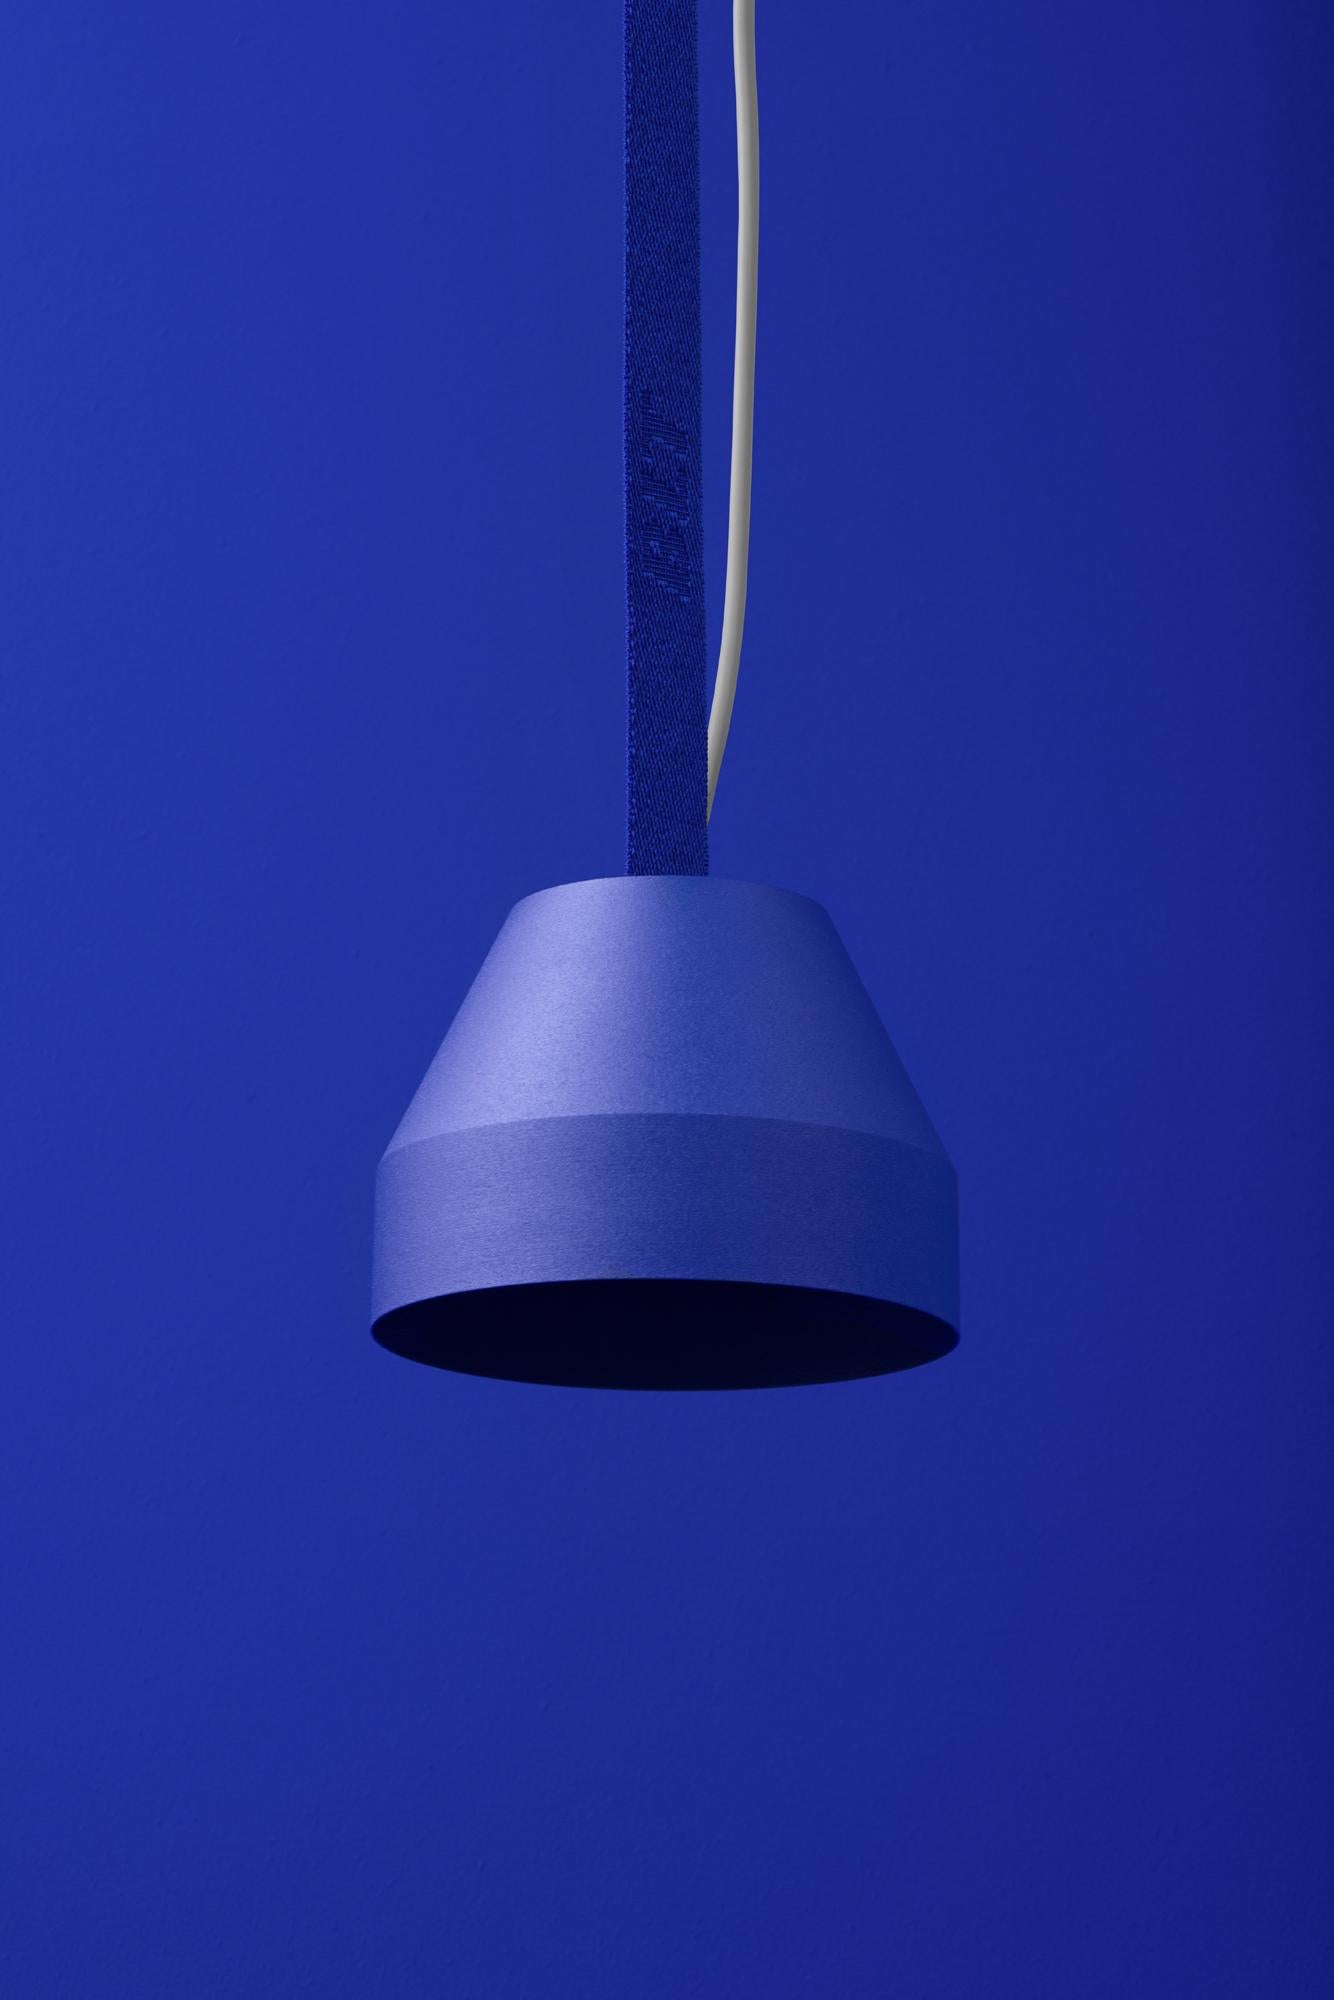 BLT_CAP Small Ultra Blue Pendant Lamp by +kouple
Dimensions: Ø 16 x H 12 cm. 
Materials: Powder-coated steel and textile.

Available in different color options. The rod length is 250 cm. Please contact us.

All our lamps can be wired according to